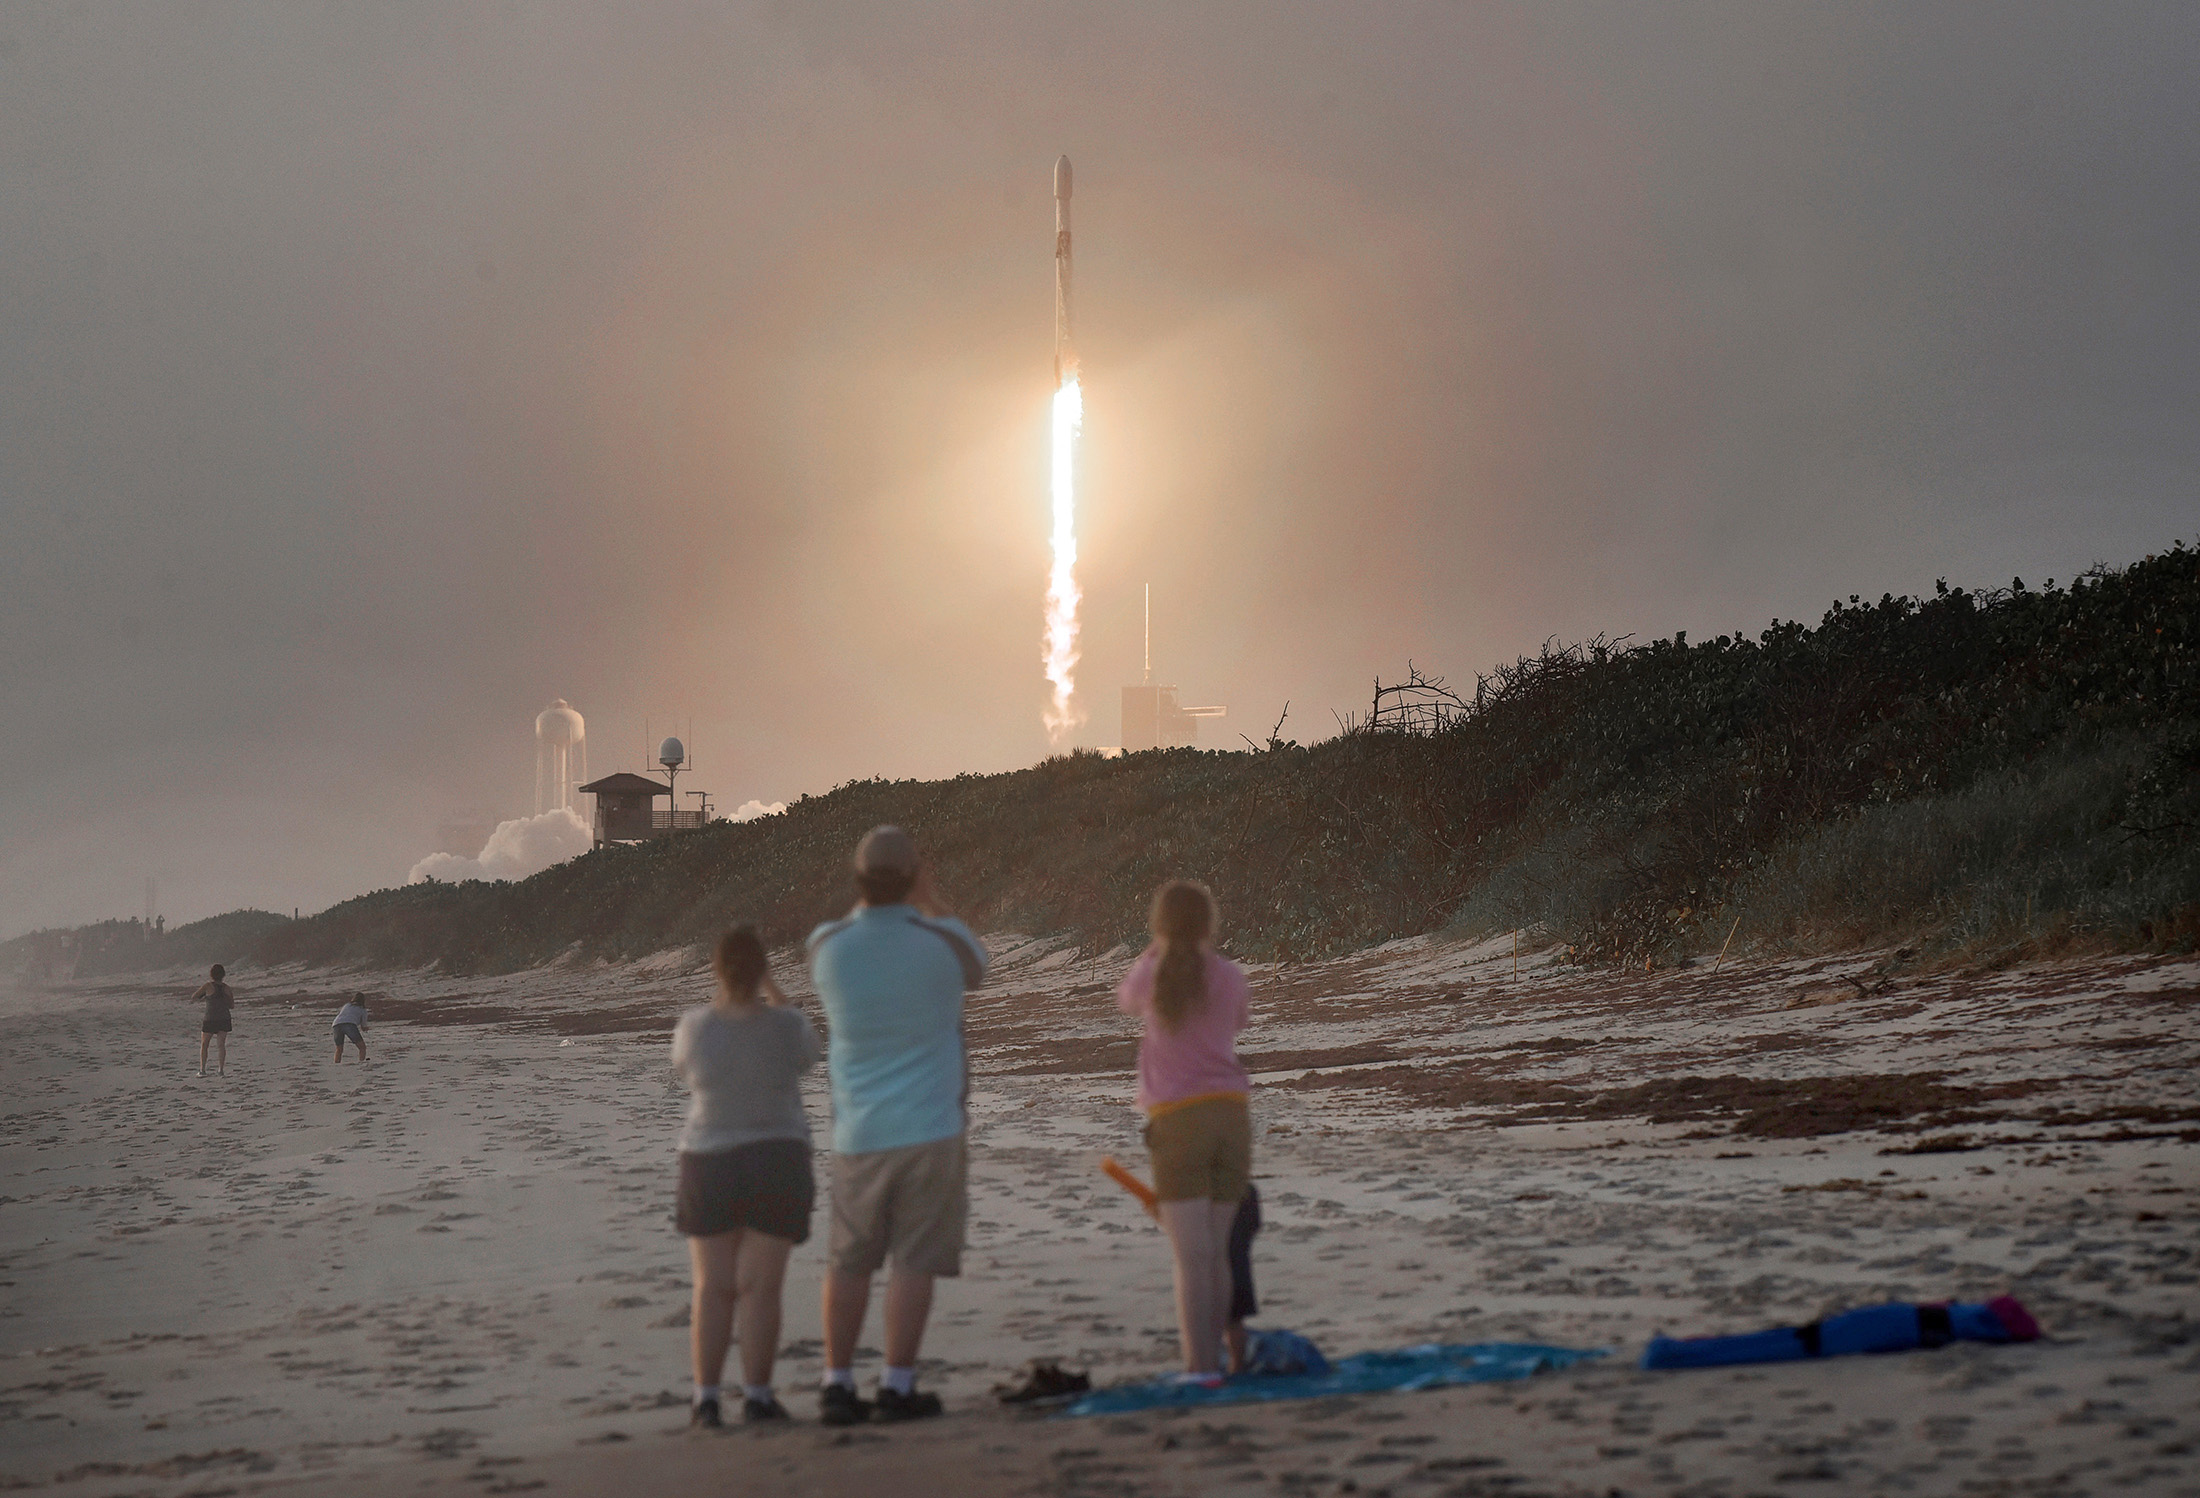 The SpaceX Falcon 9 rocket carrying 60 Starlink satellites is launched from Station 39A at the Kennedy Space Center in Cape Canaveral, Fla. On October 6, 2020.